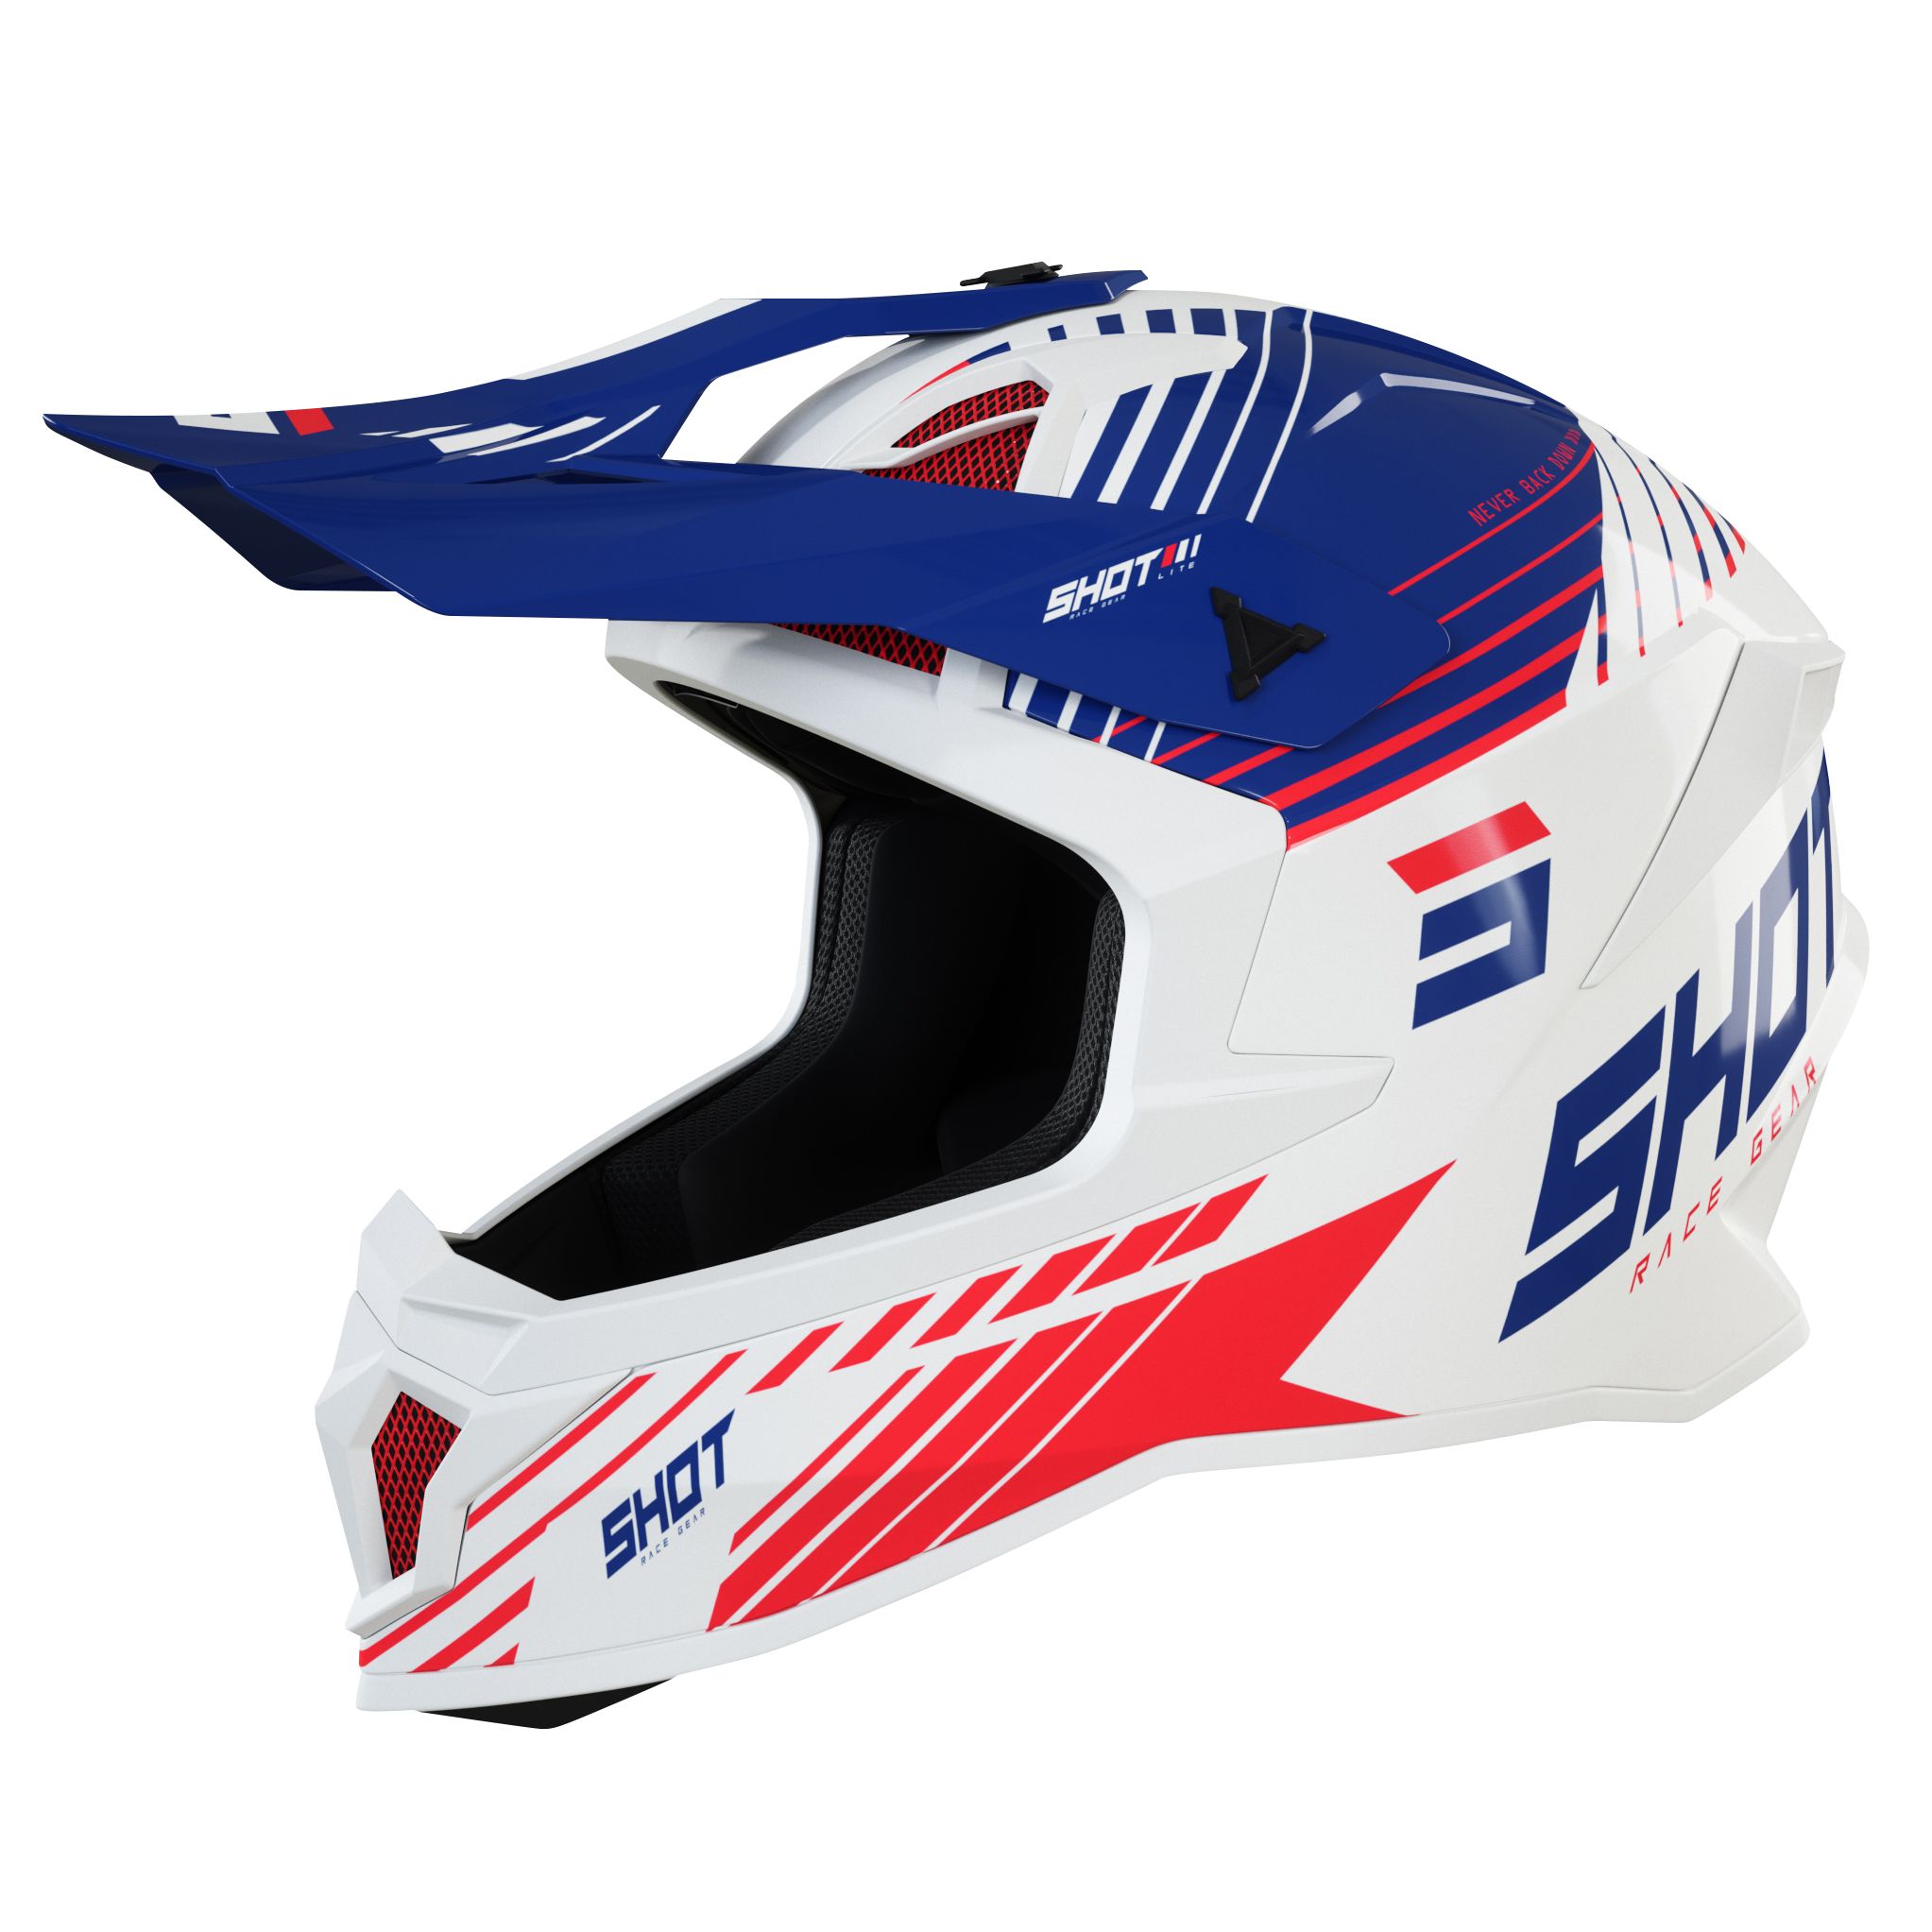 Image of Casque cross Shot LITE FURY - NAVY RED GLOSSY 2022